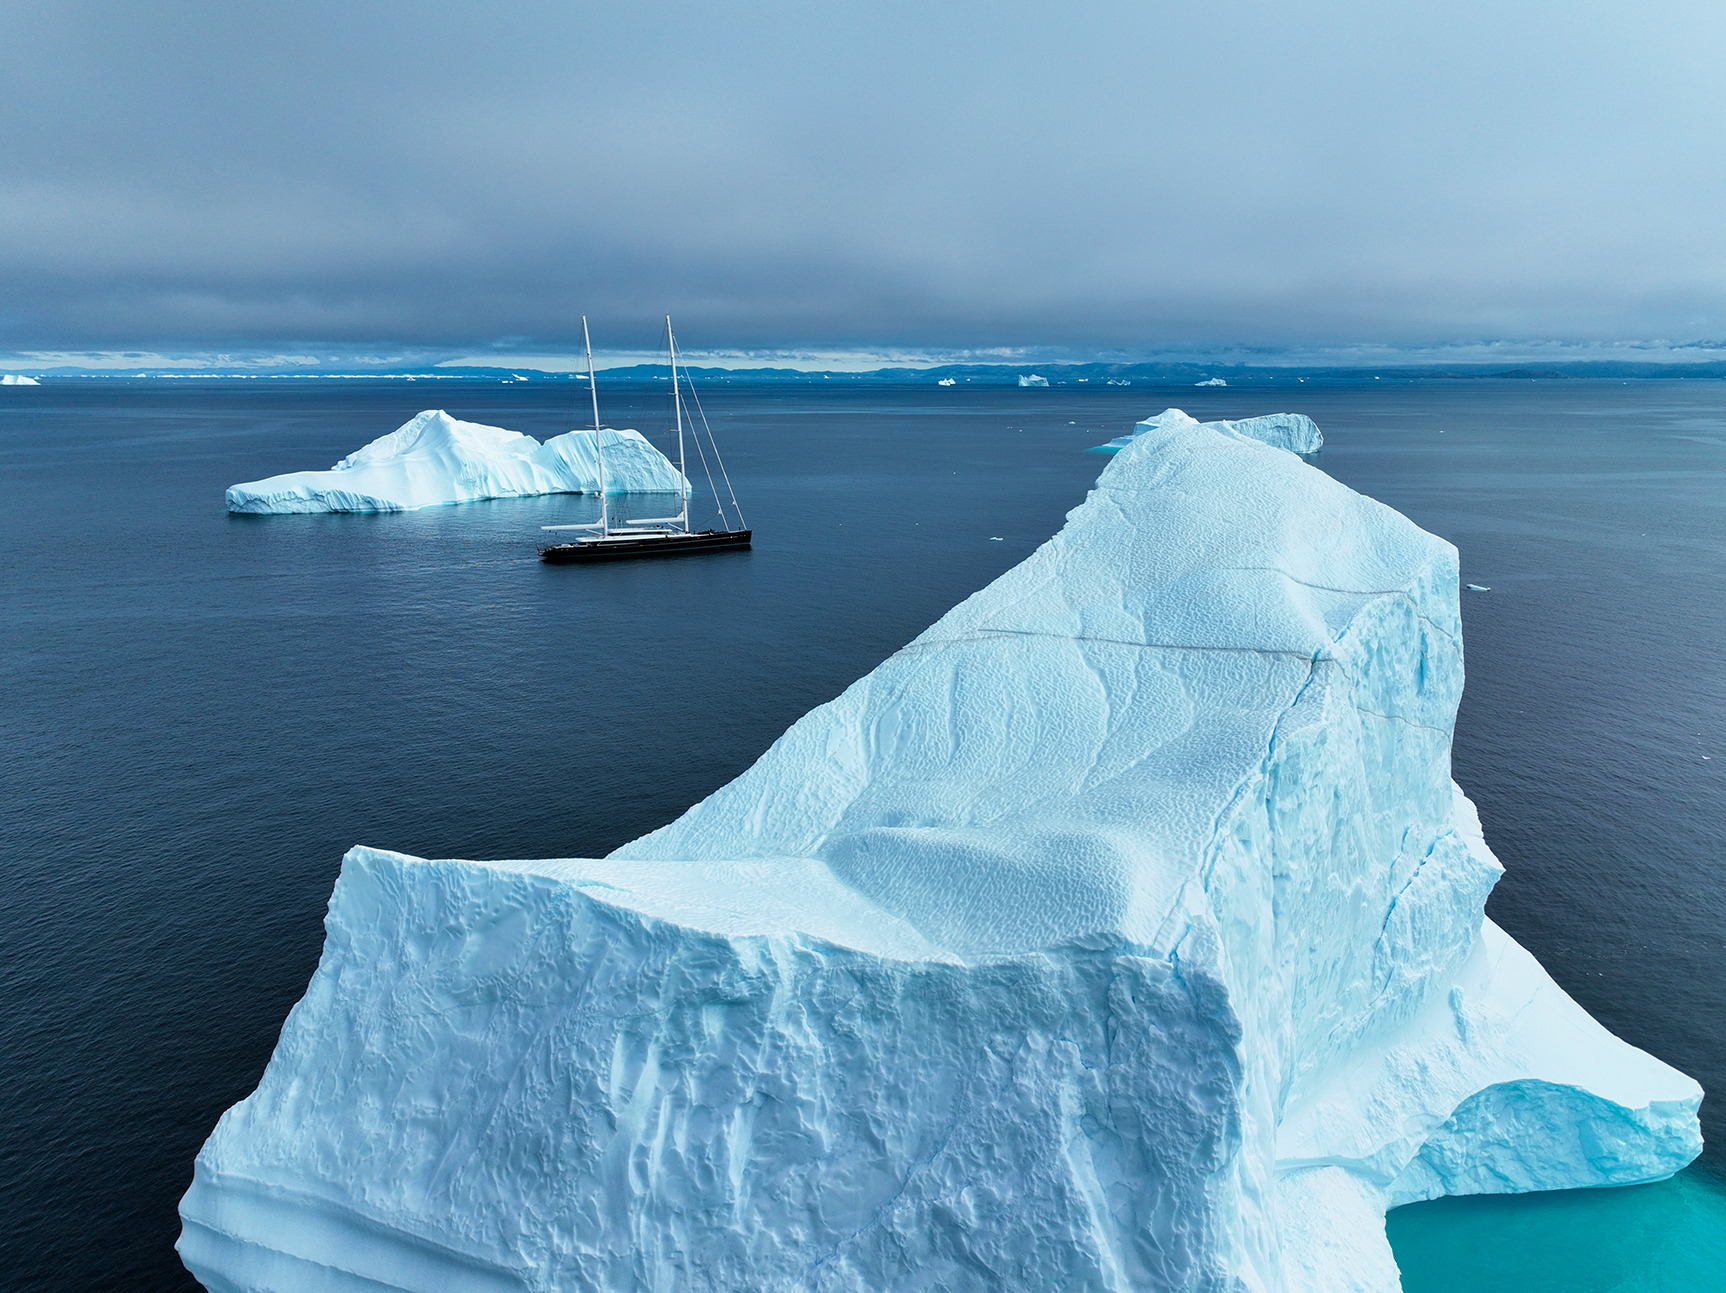 A superyacht in the water next to icebergs